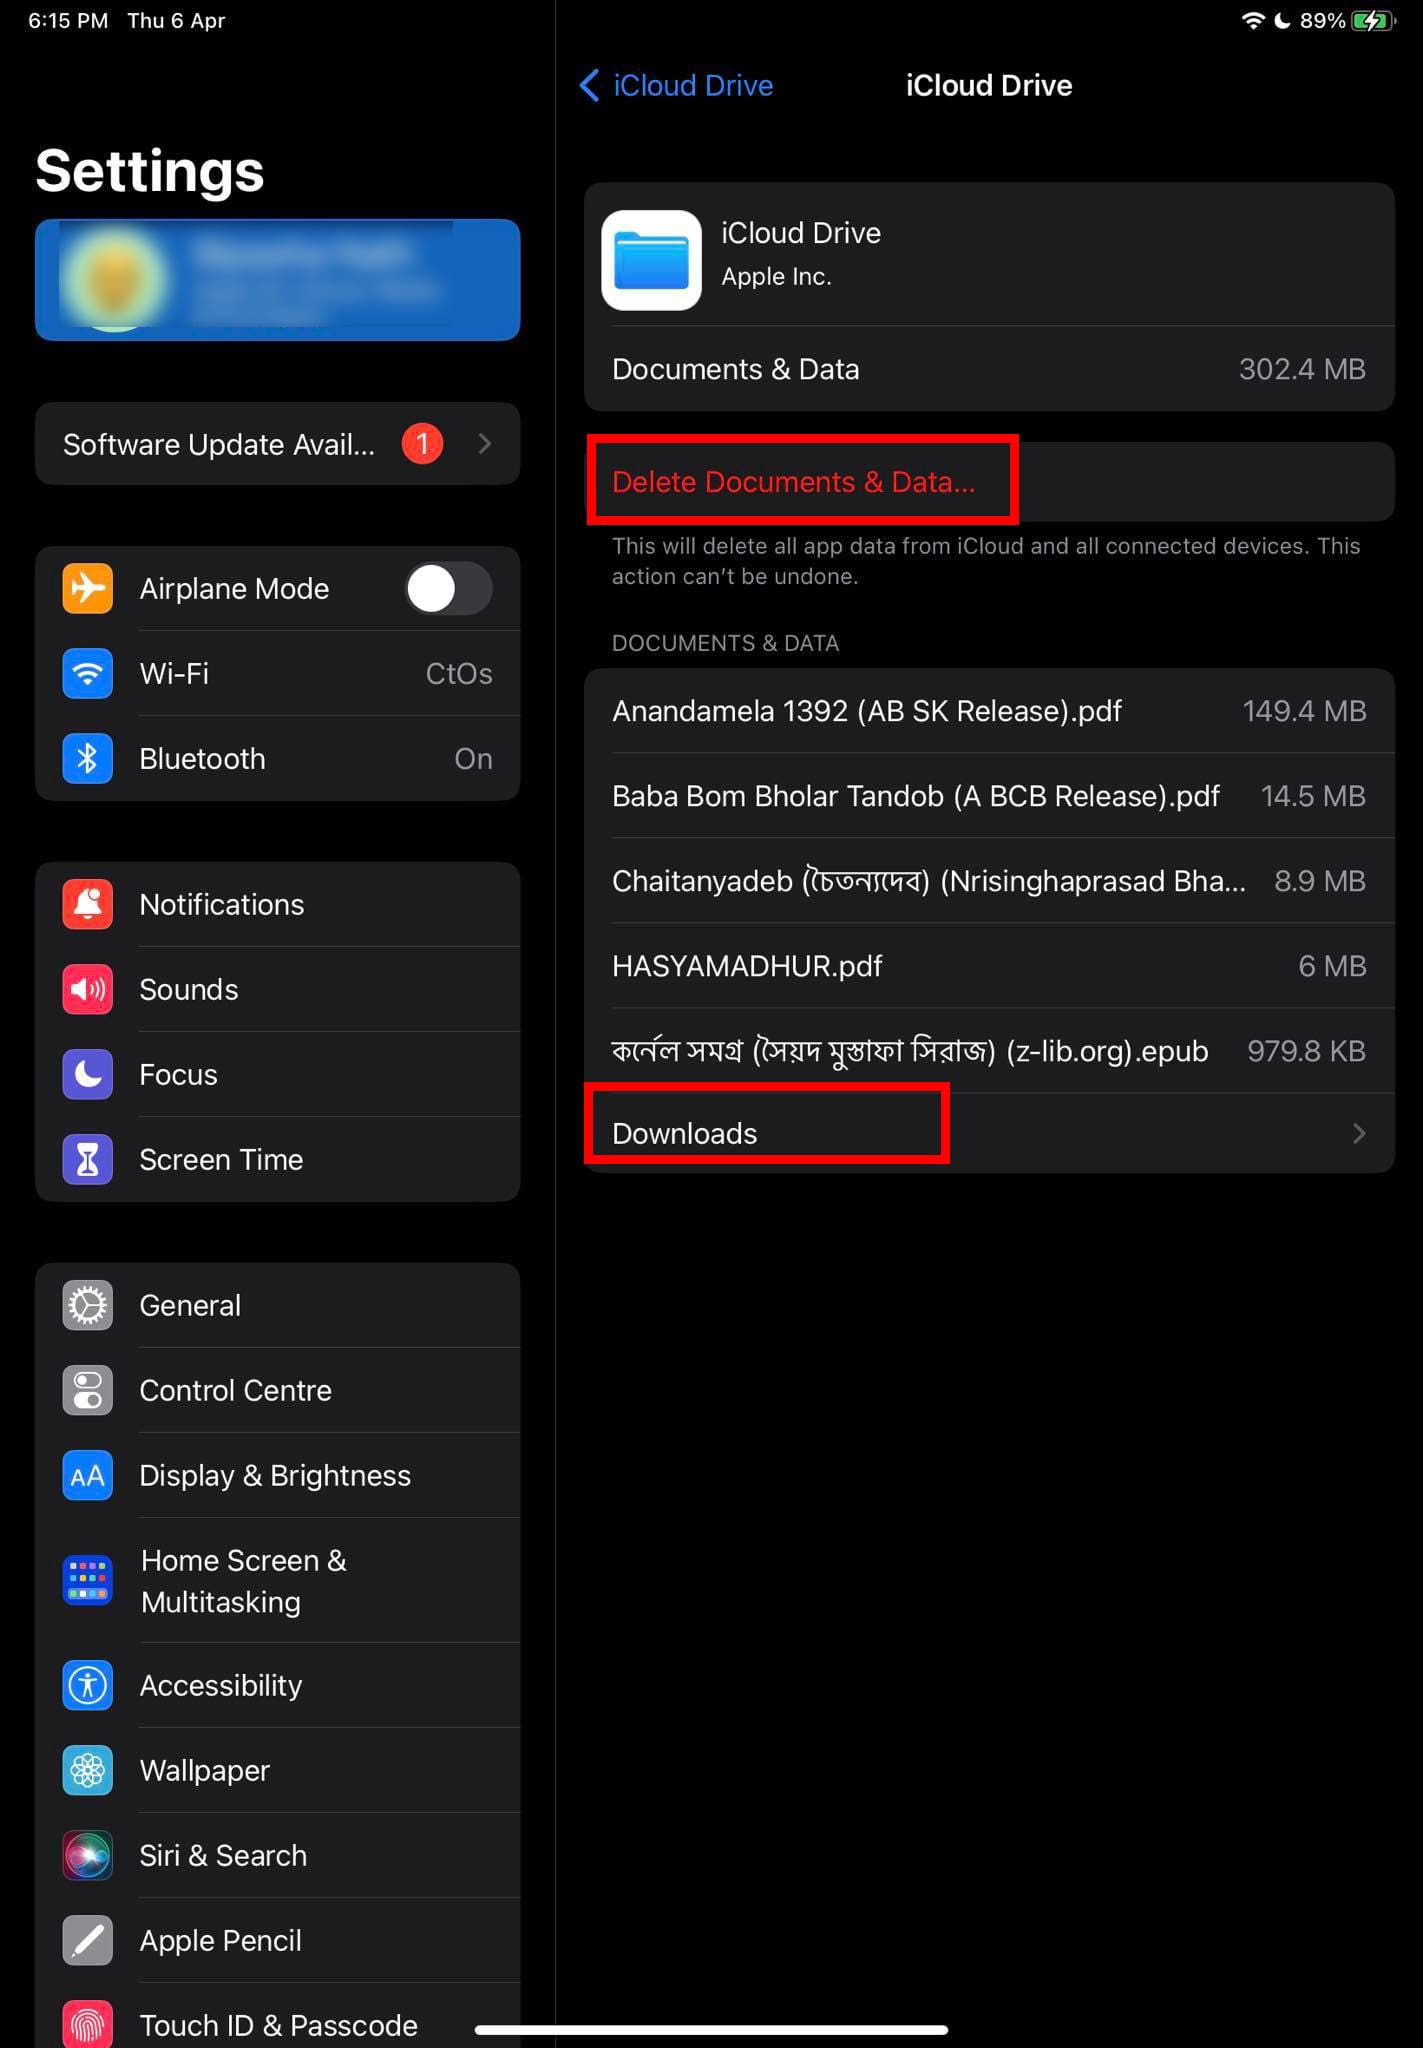 How to delete iCloud Drive app data